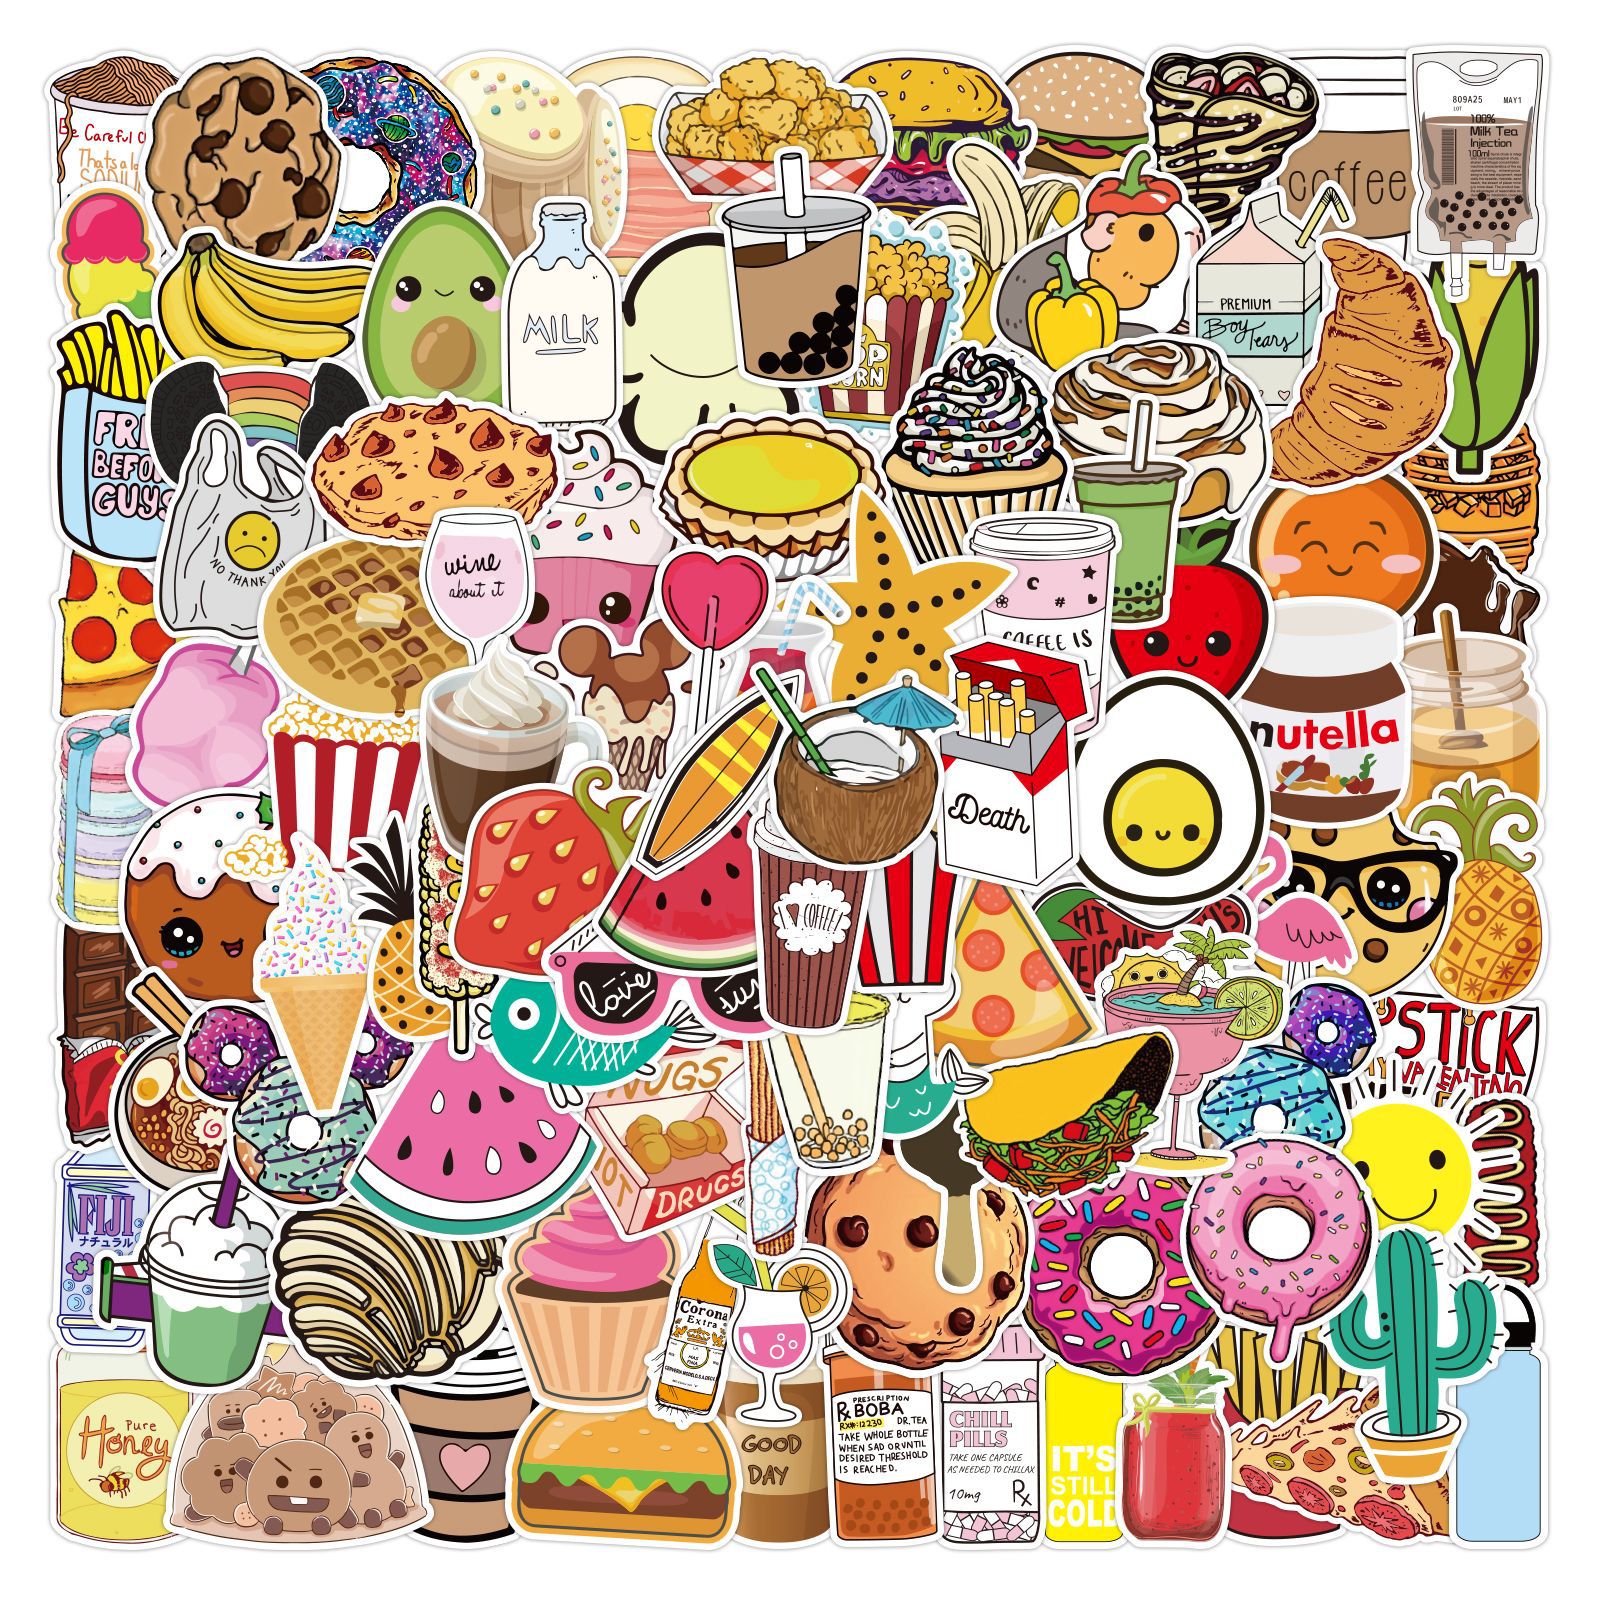 The Cute Food Stickers is a simple and interesting sticker